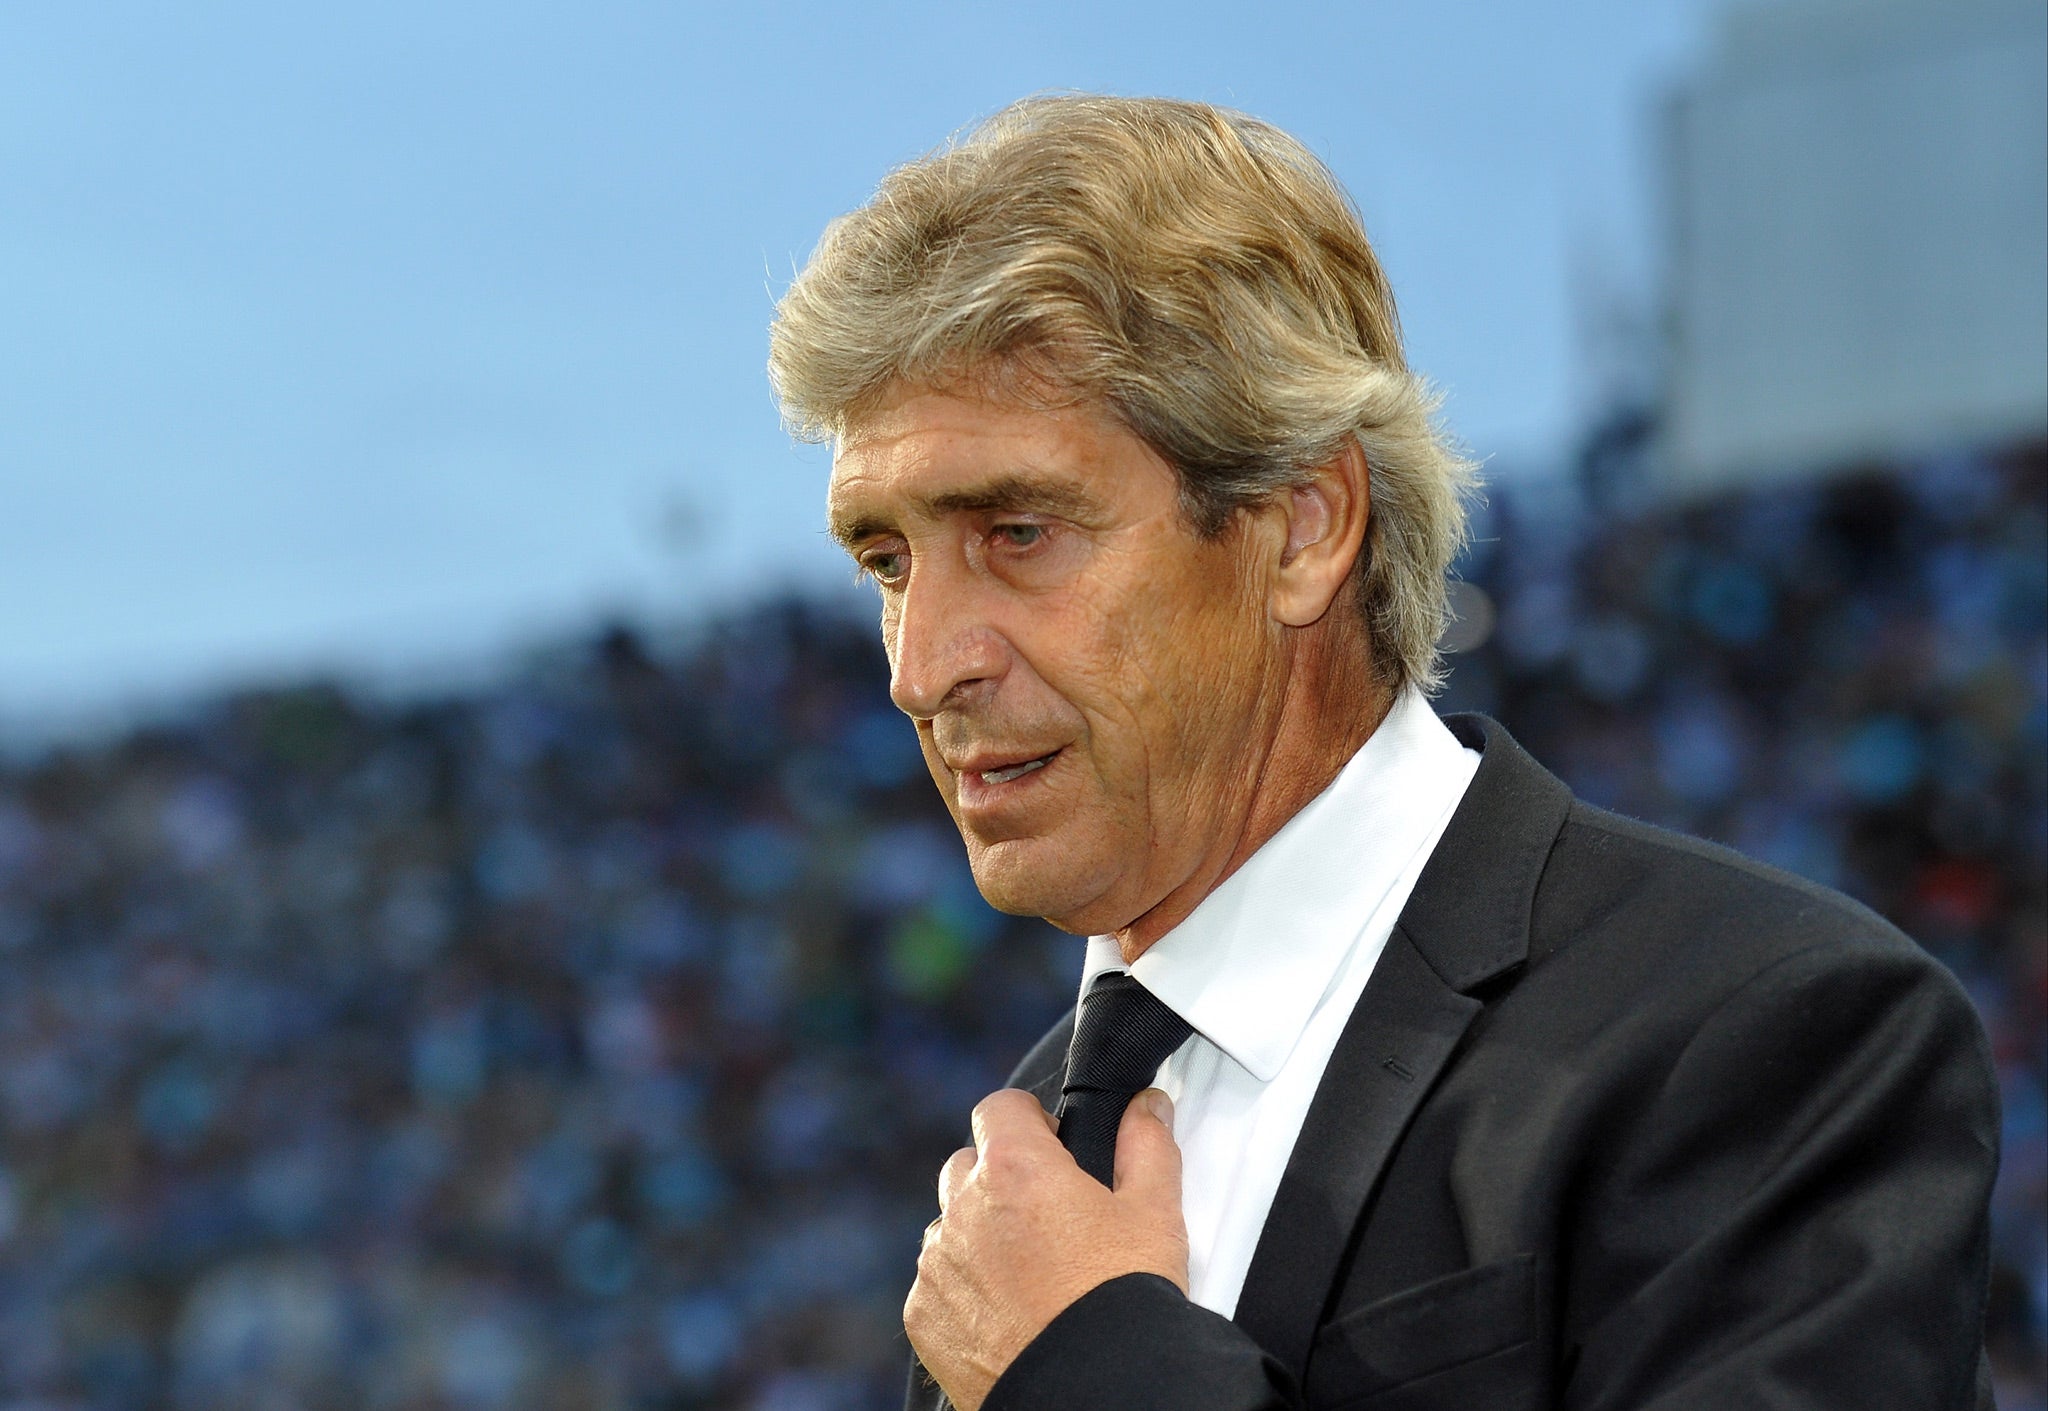 Manuel Pellegrini will leave Malaga at the end of the season amid speculation he will join Manchester City